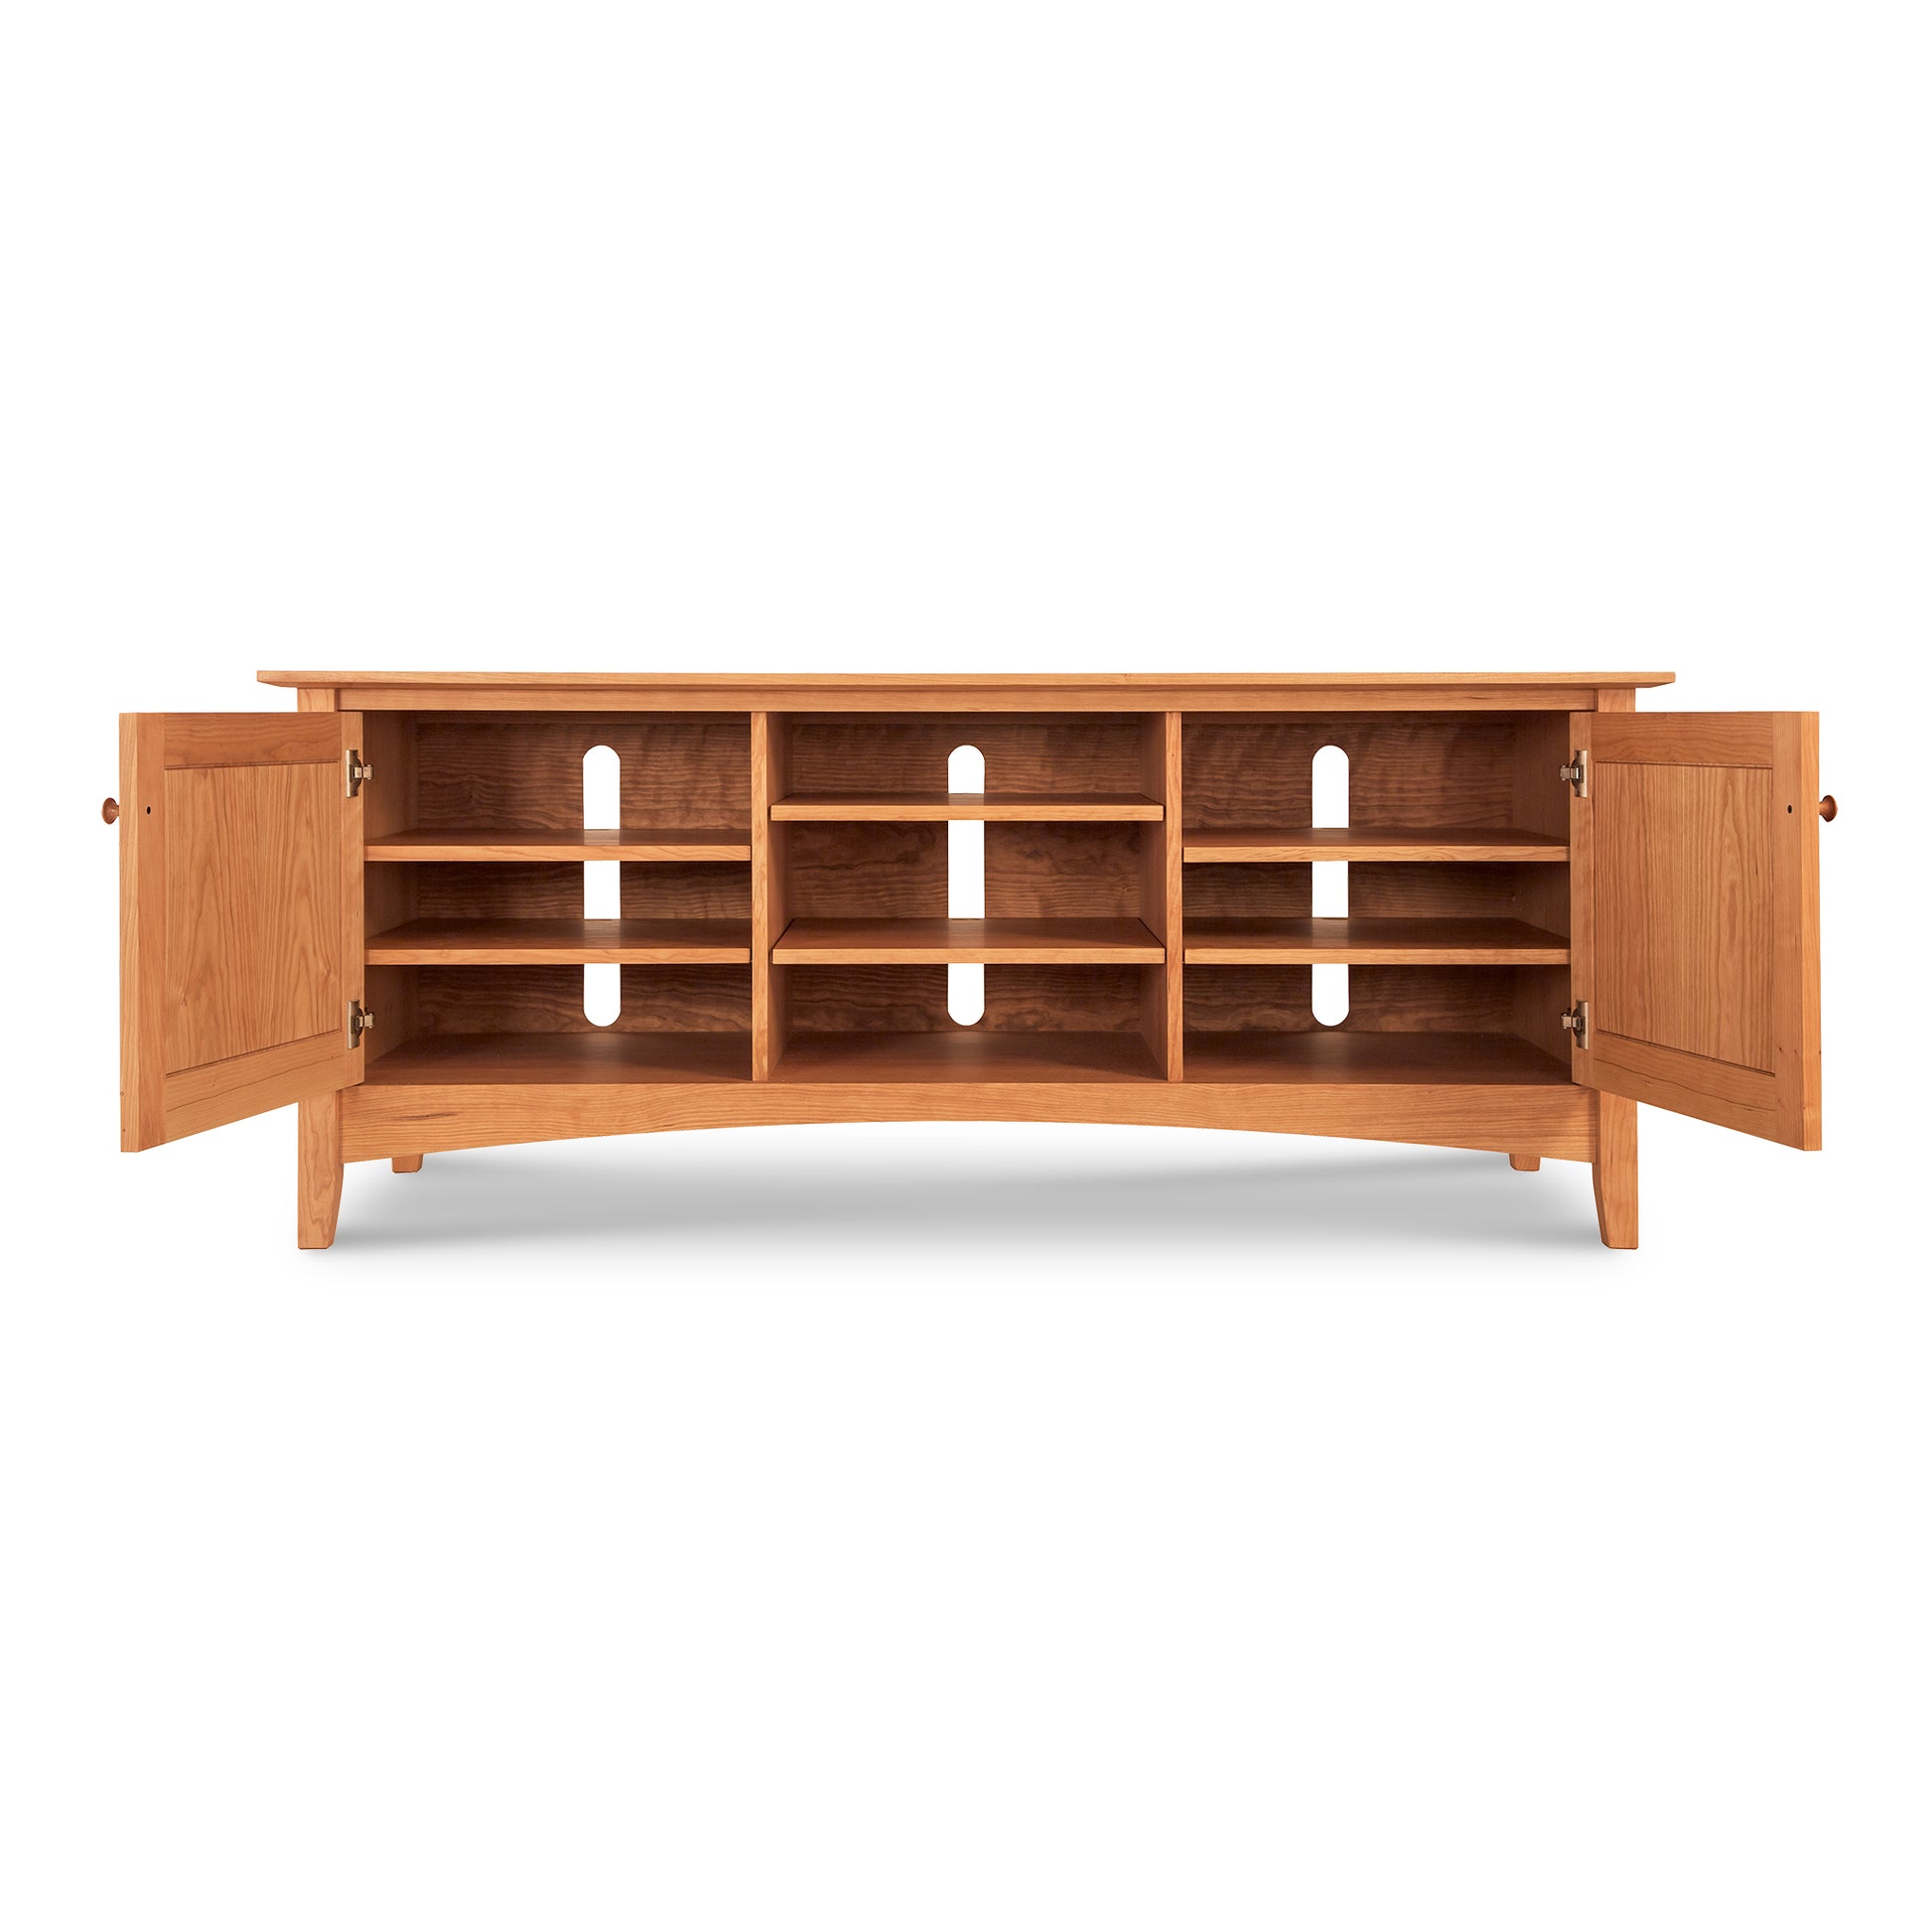 A Maple Corner Woodworks American Shaker 67" TV Stand with open shelf storage and two side cabinets, isolated on a white background.